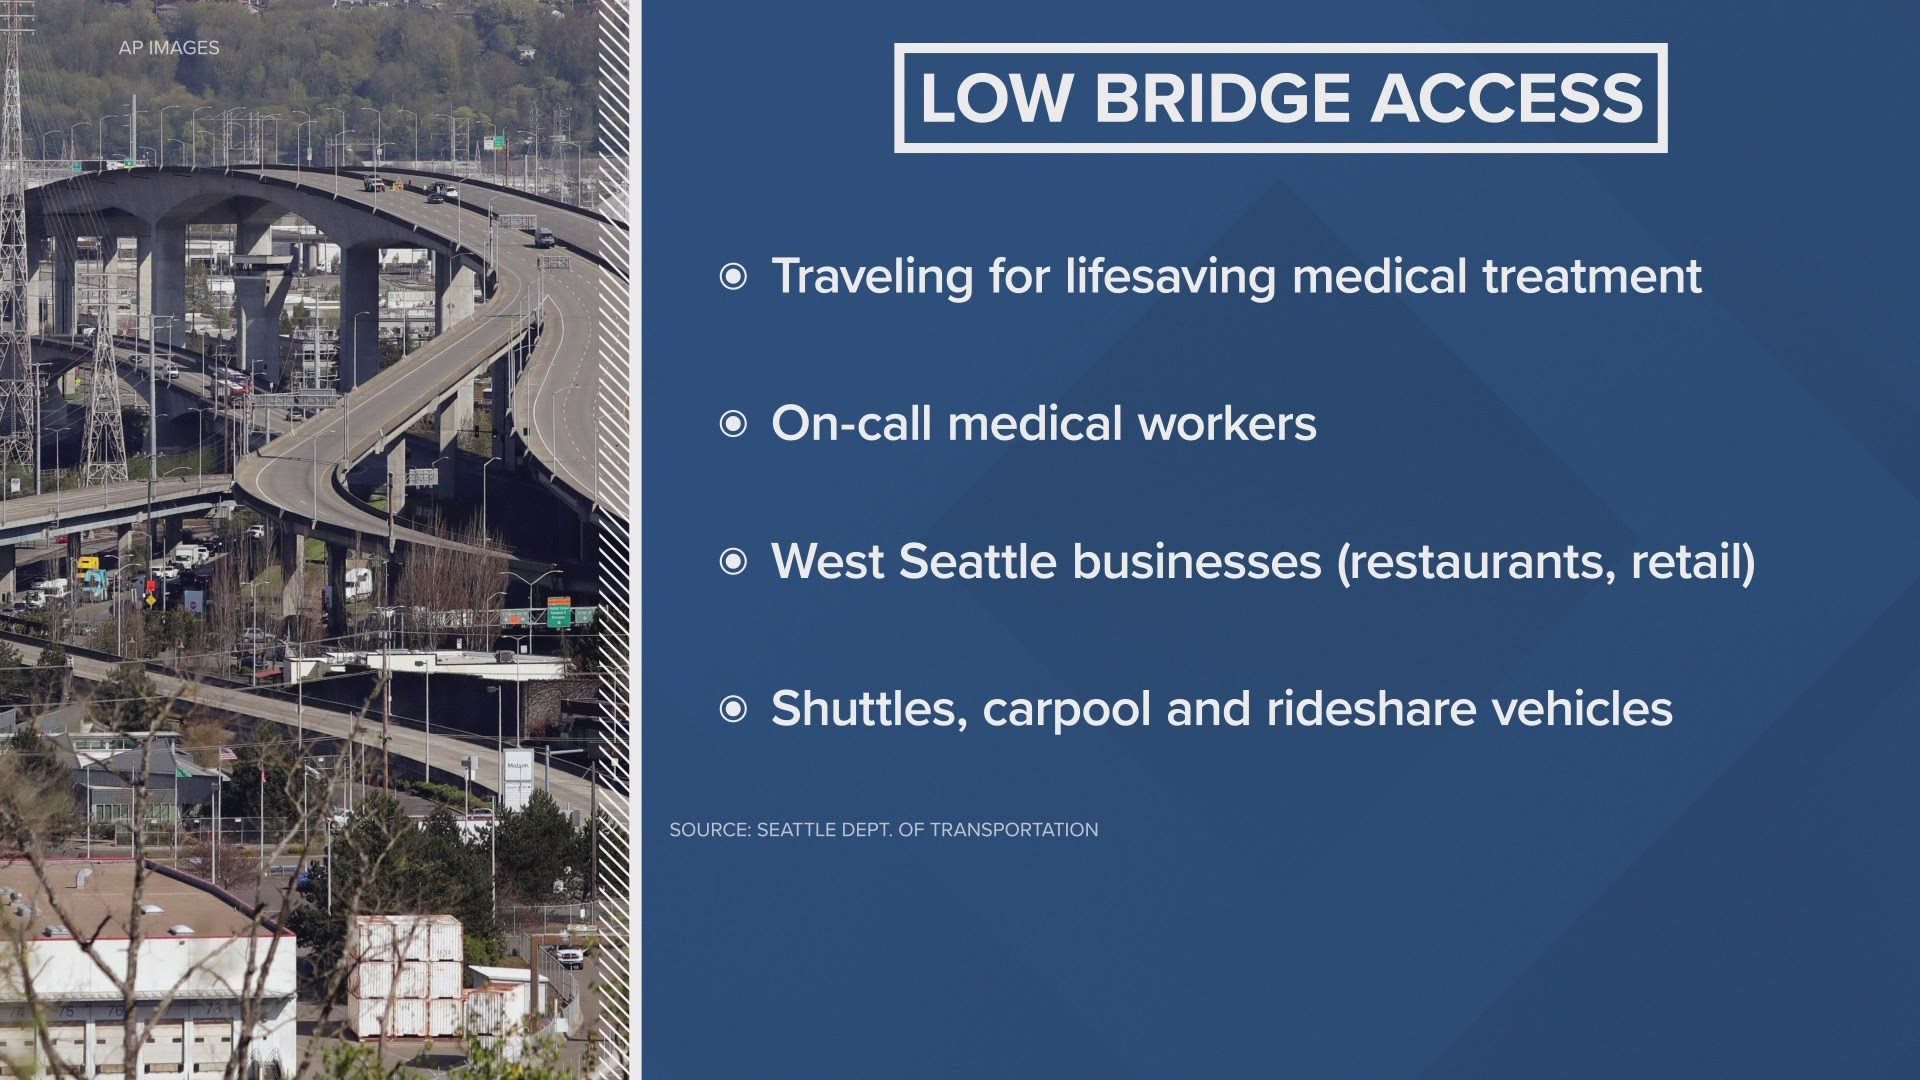 On-call medical workers, west Seattle restaurants and retail businesses are among those who can apply to SDOT for access to the Swing Bridge.